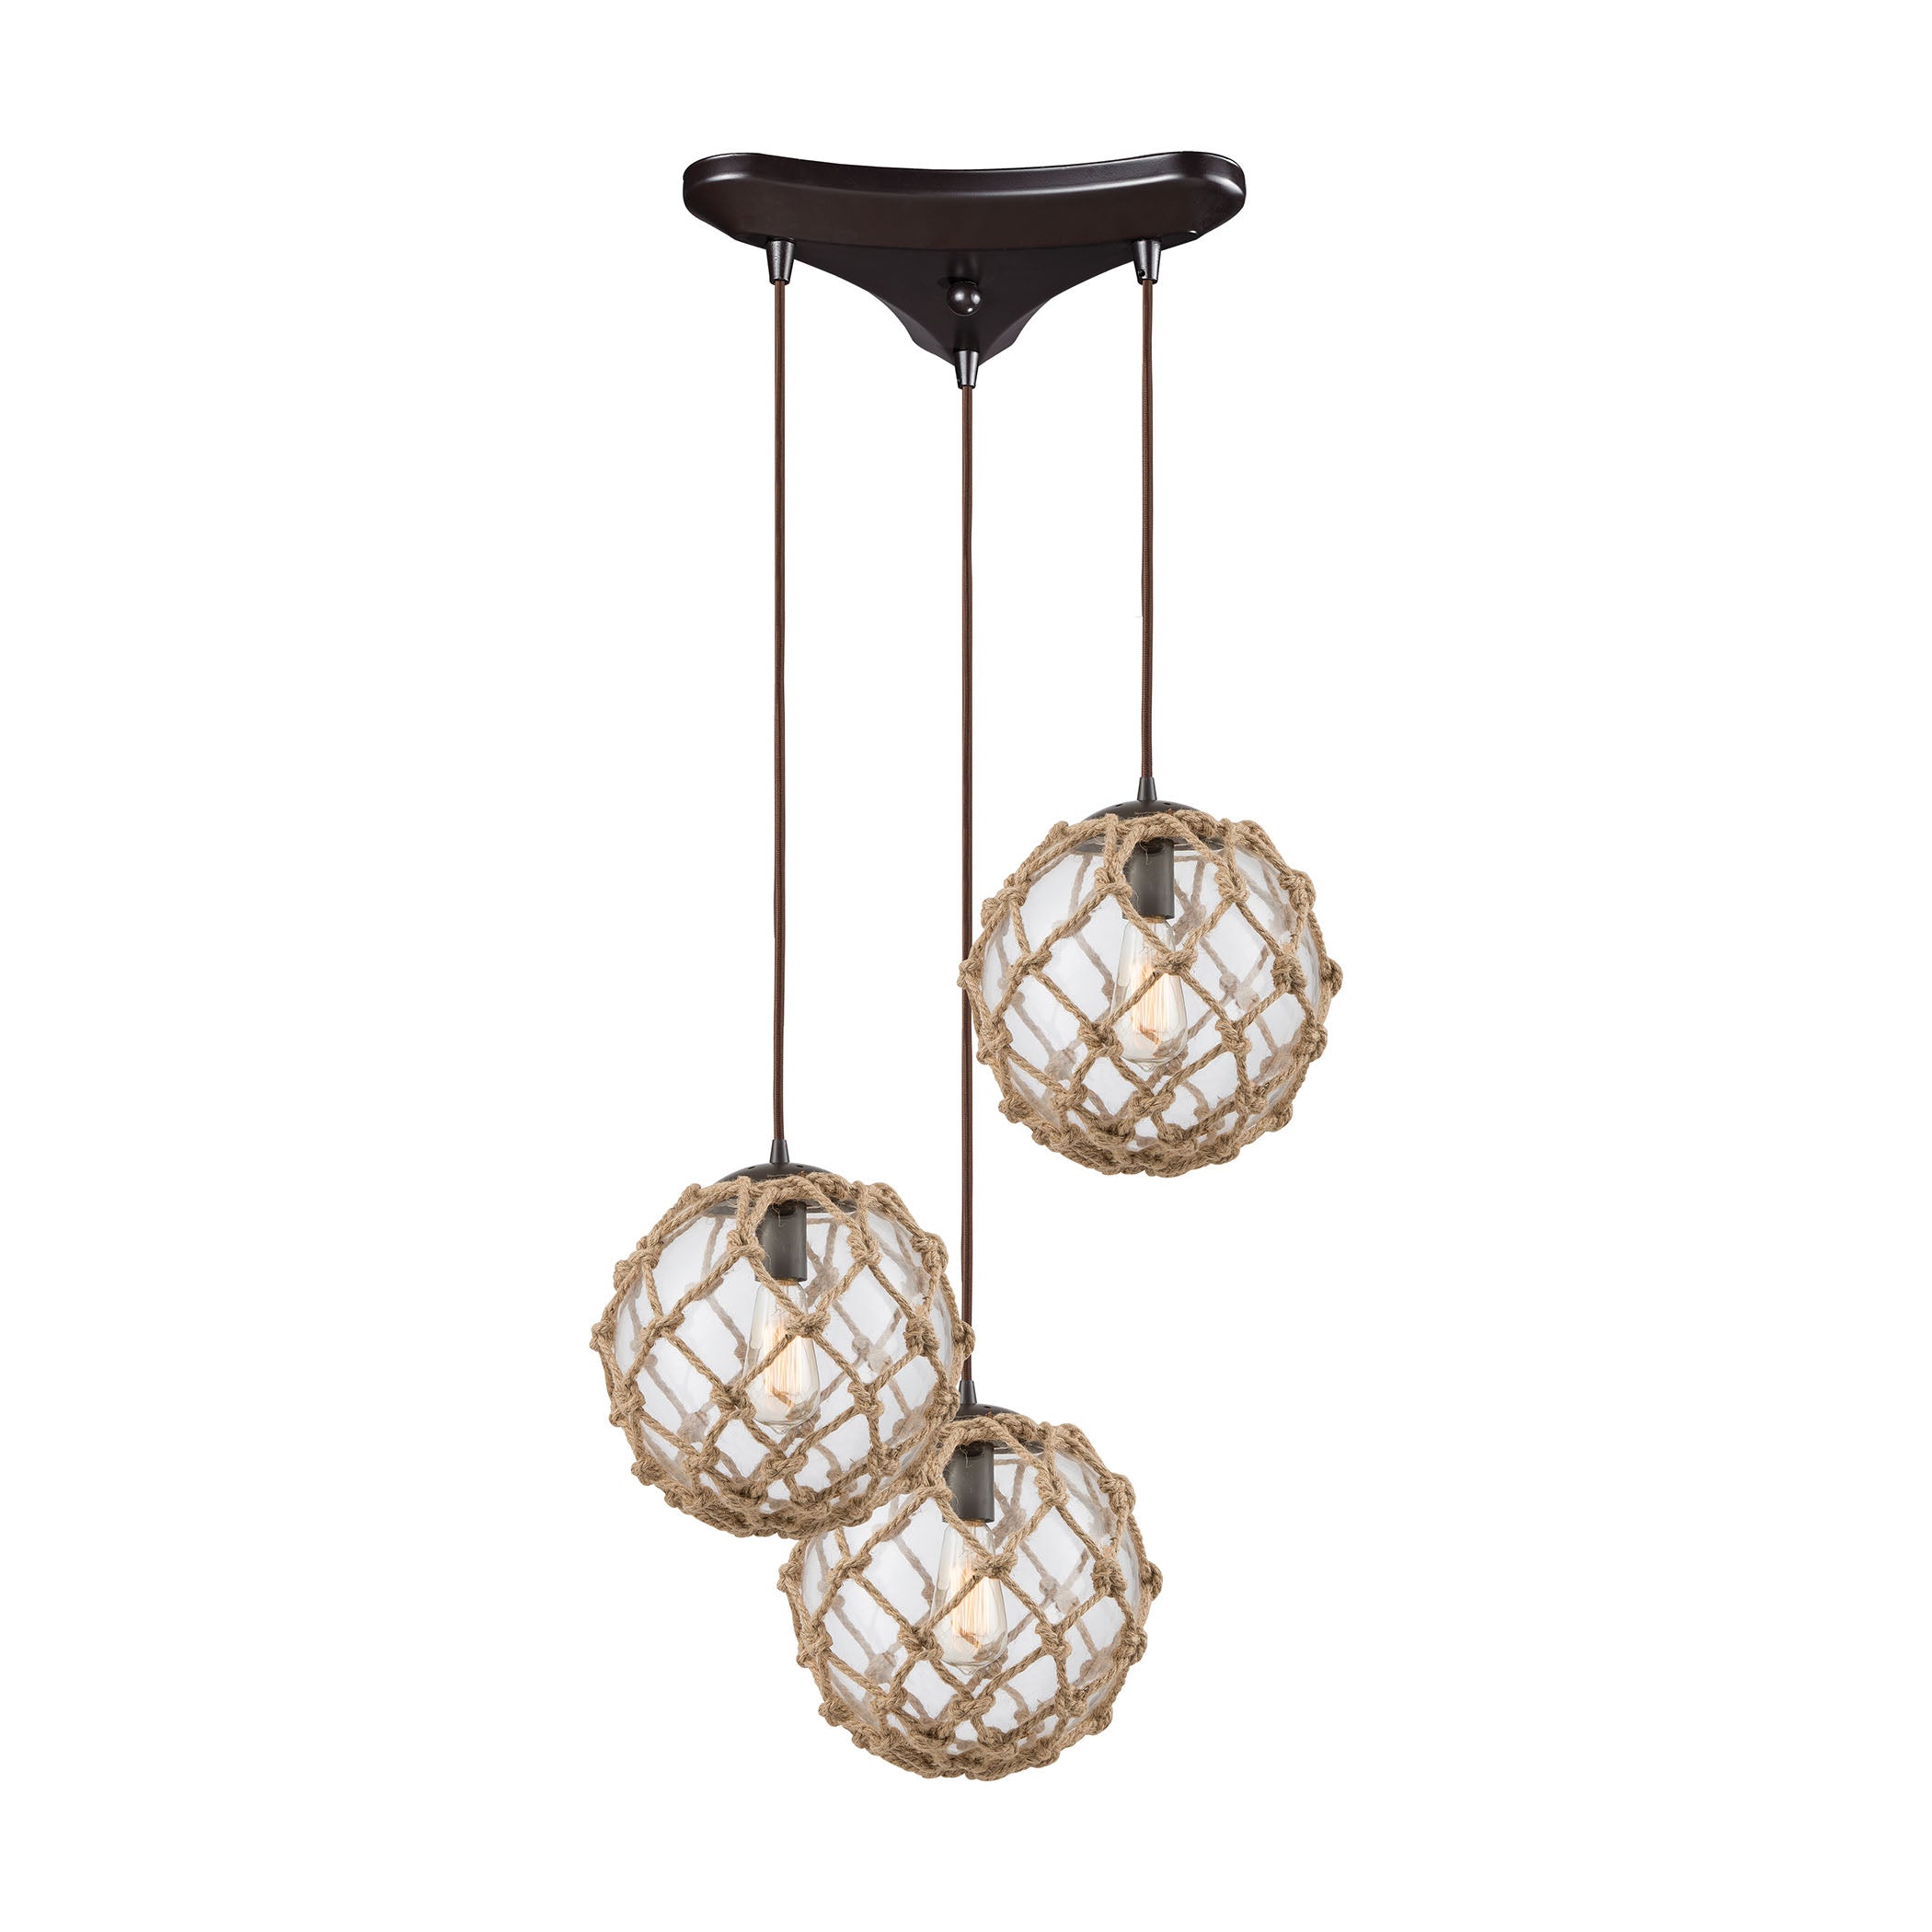 ELK Lighting 10715/3 Coastal Inlet 3-Light Triangular Pendant Fixture in Oiled Bronze with Rope and Clear Glass